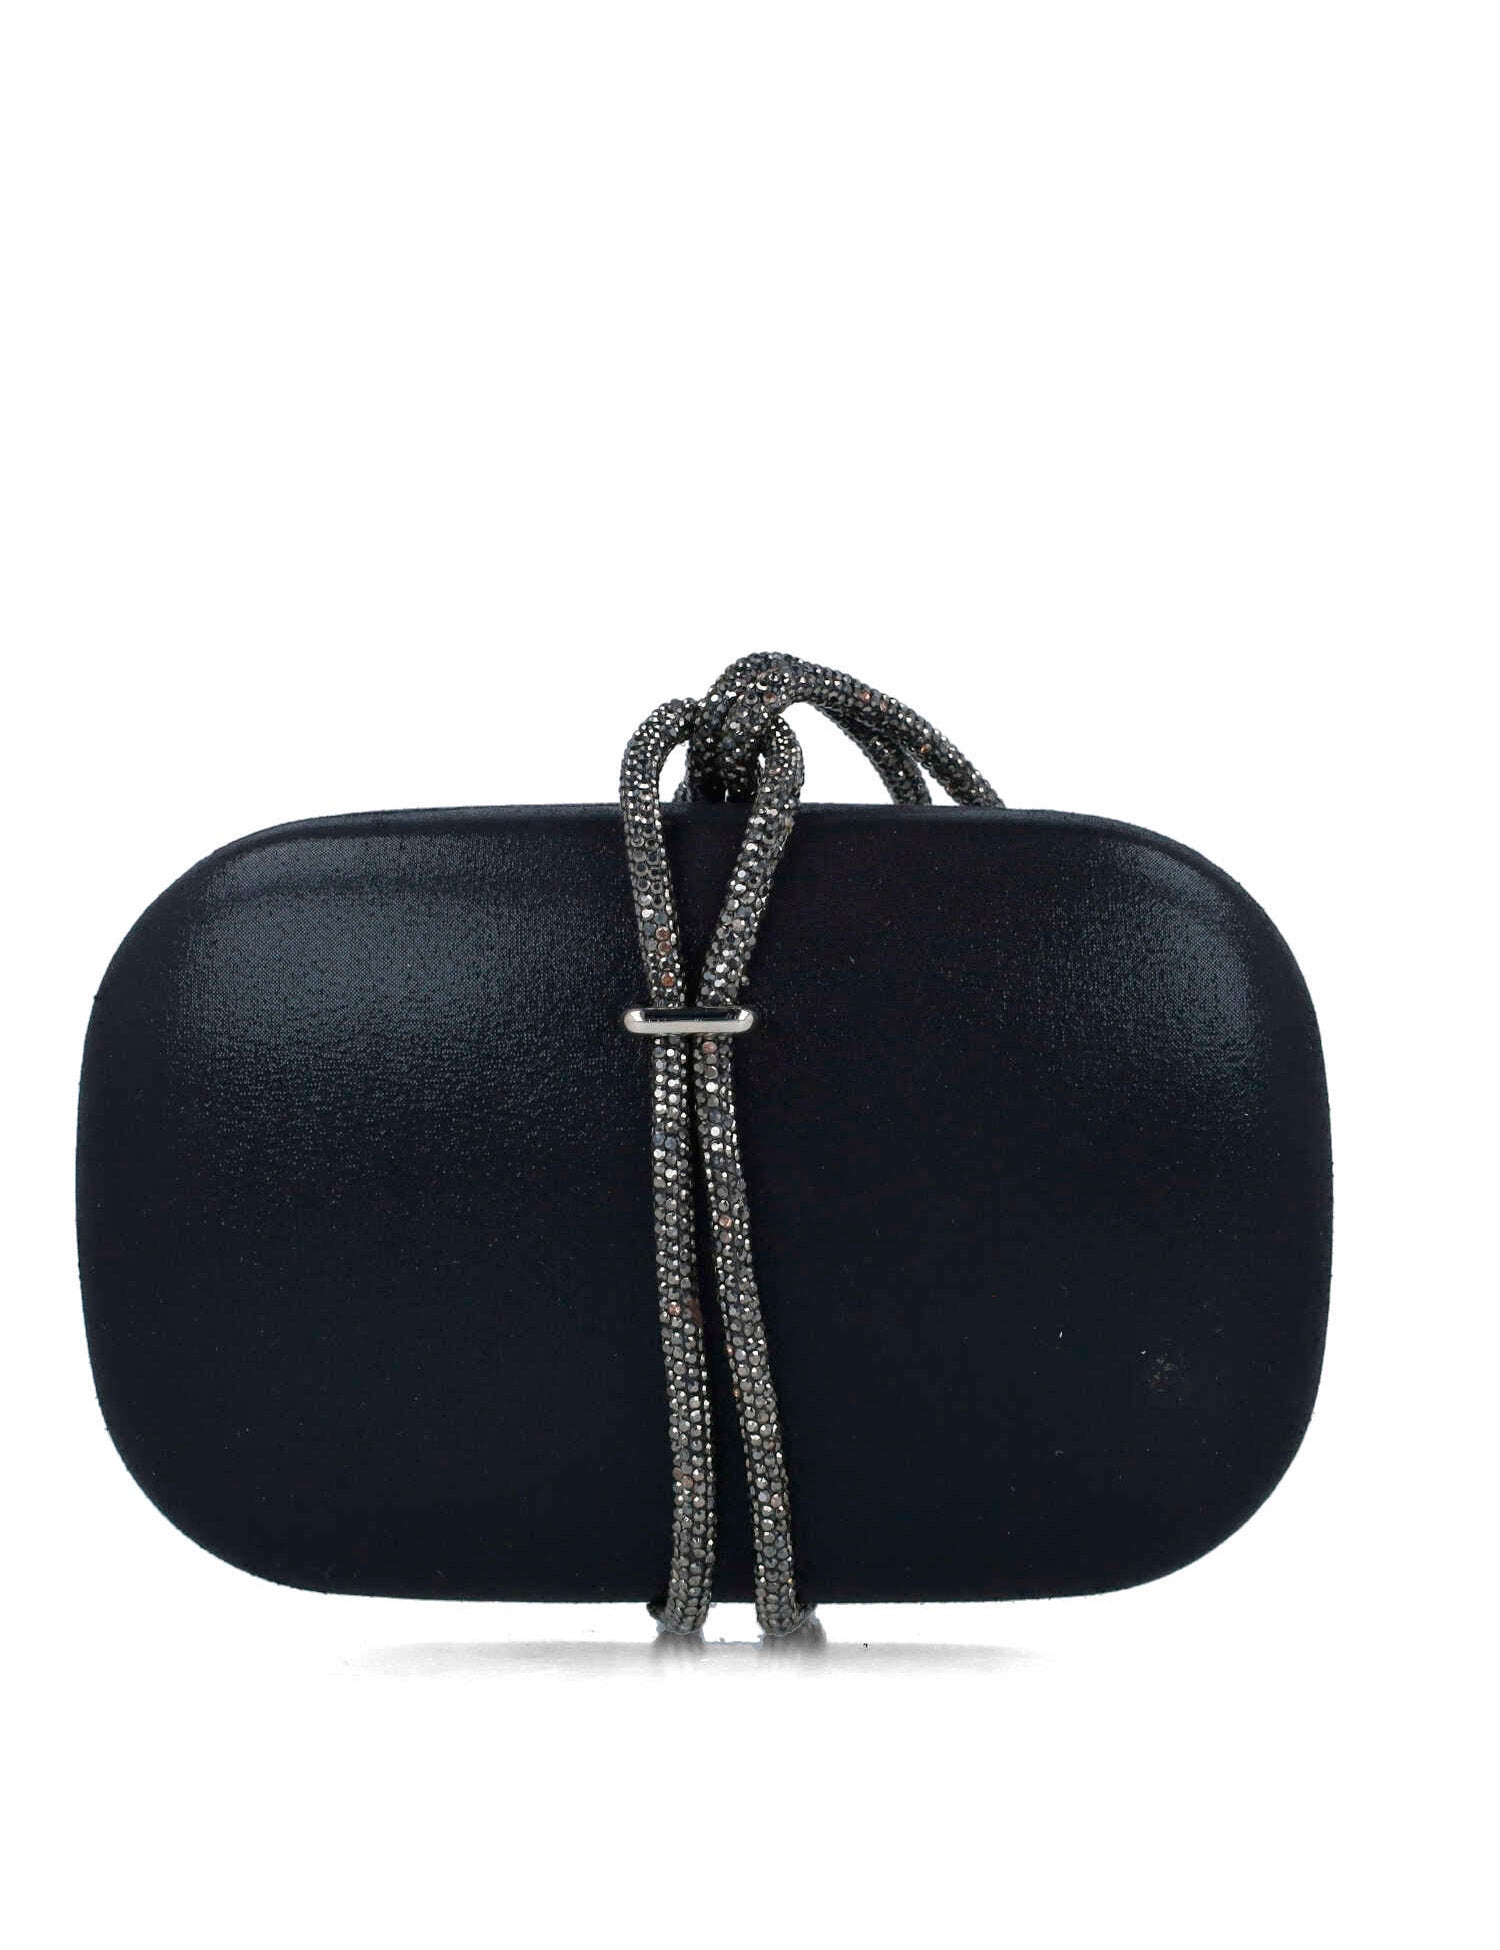 Black Clutch With Embellished Hand Strap_85499_01_03